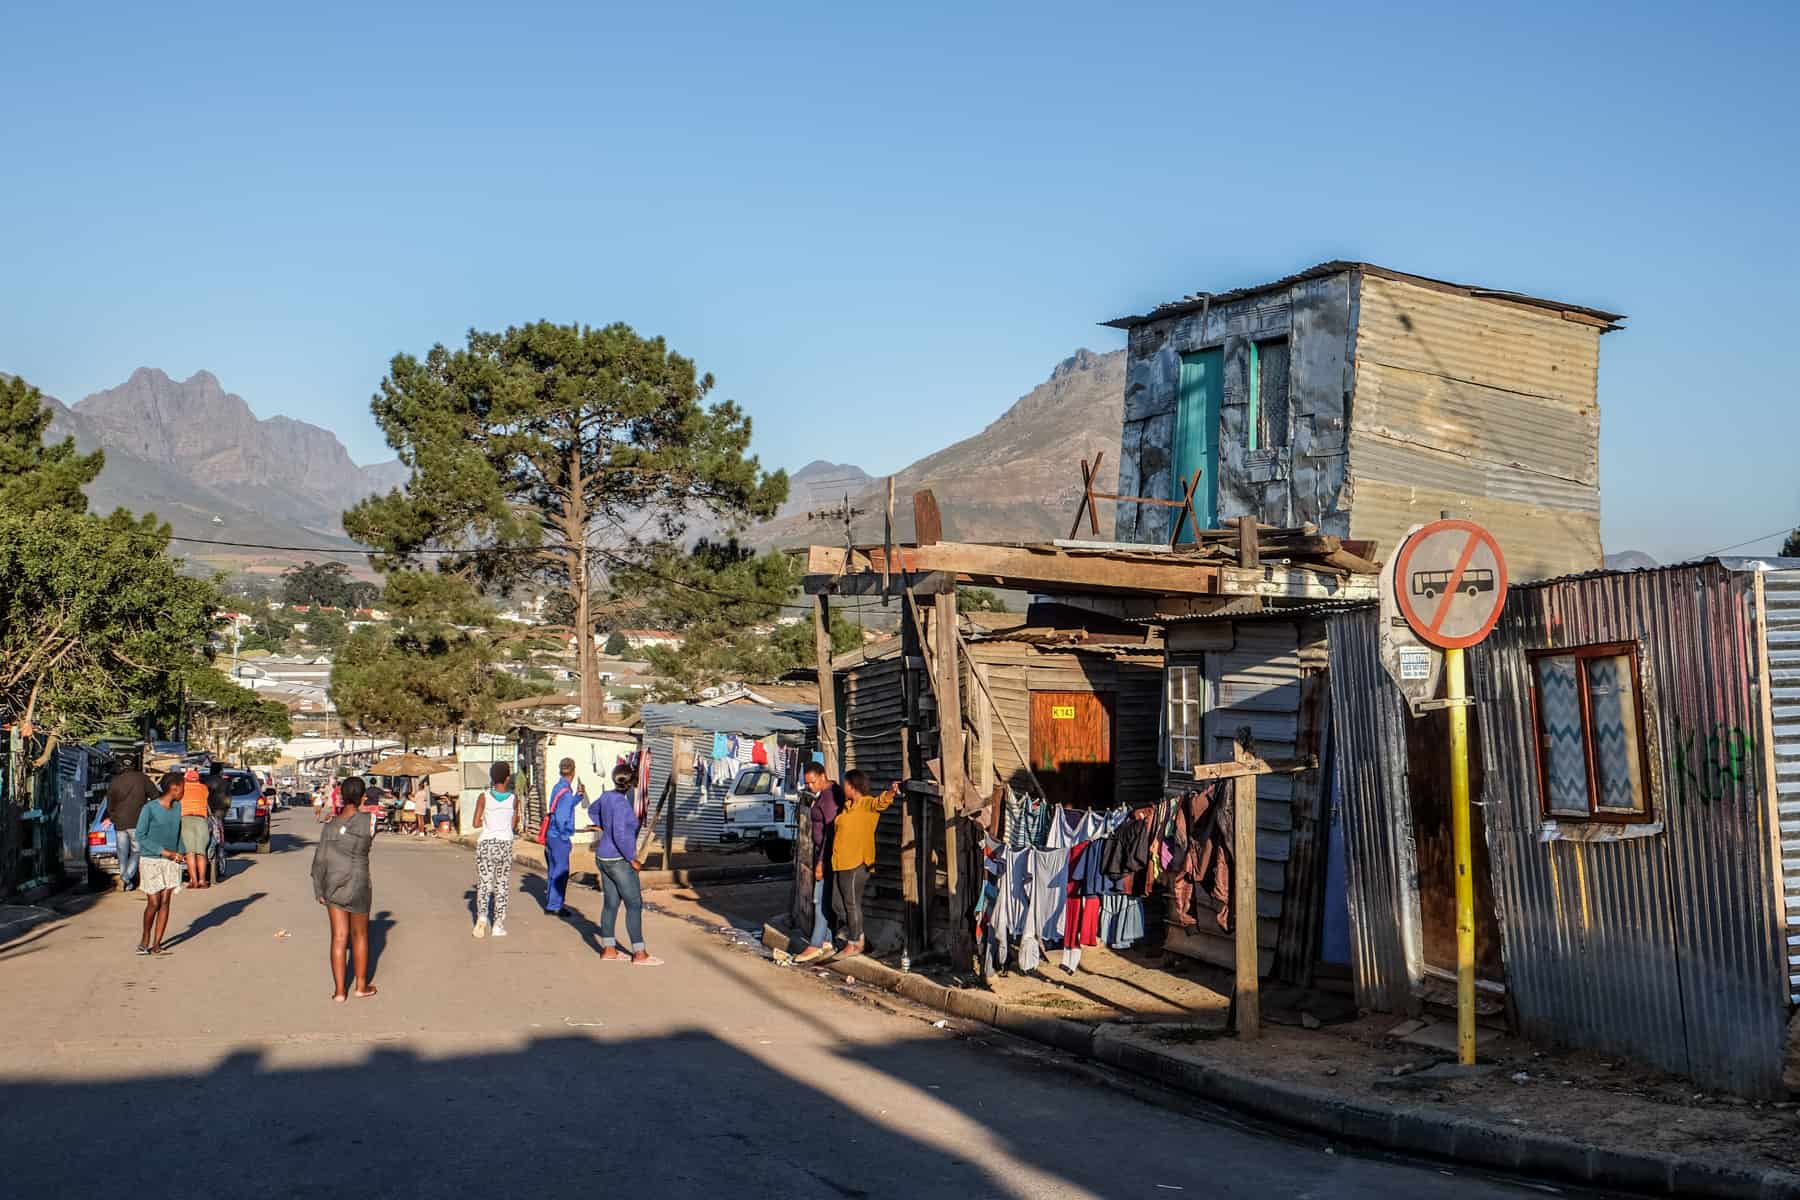 People on the streets next to shanty houses of the Kayamandi township in South Africa with mountains in the background